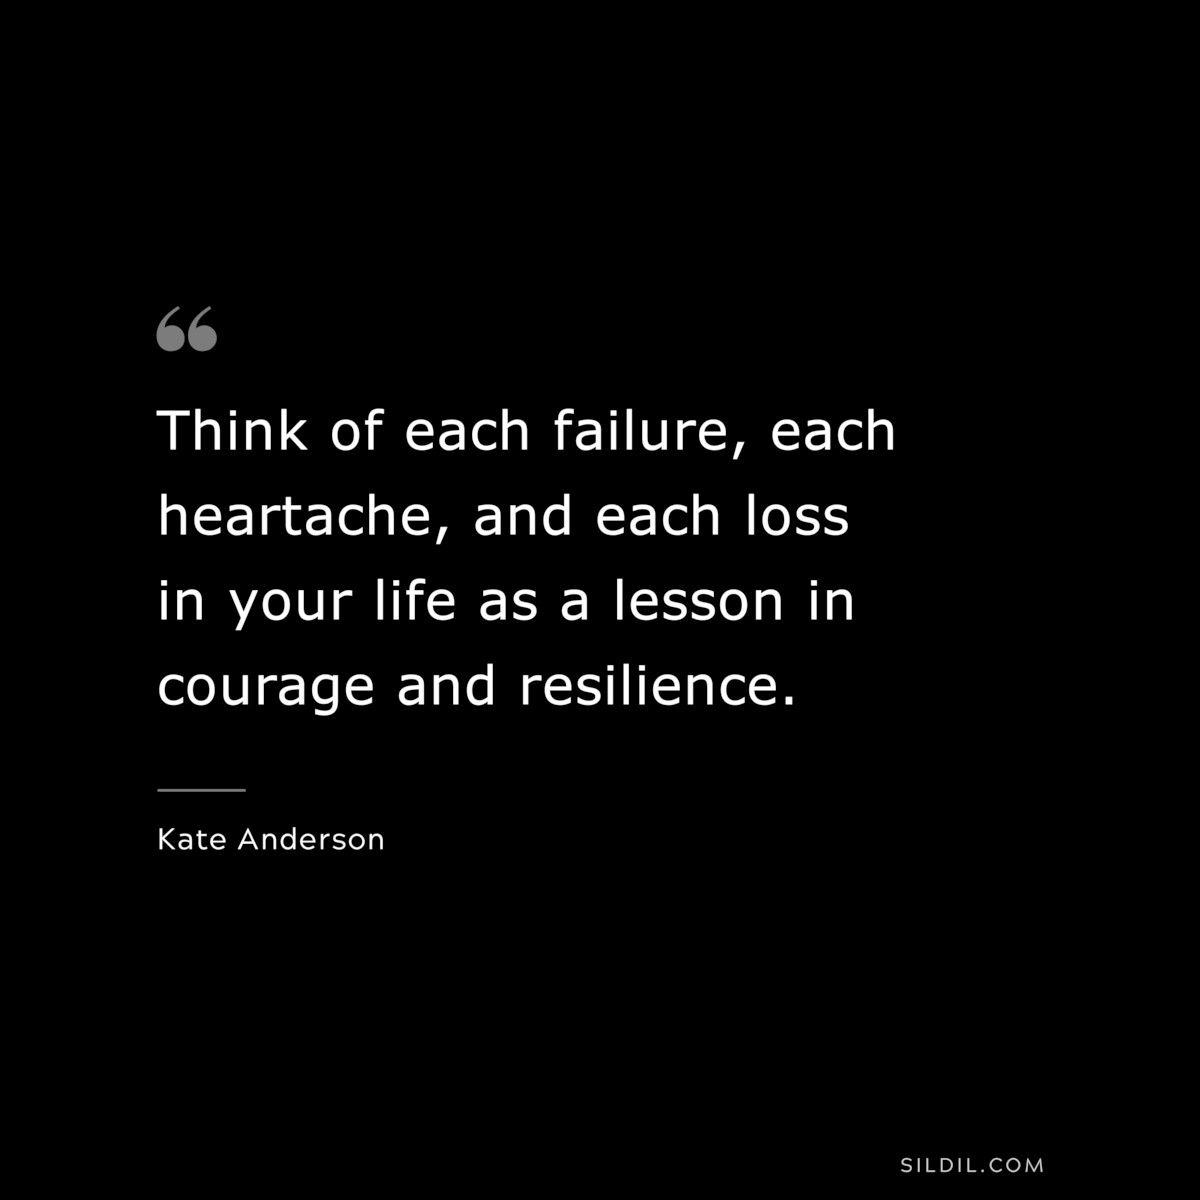 Think of each failure, each heartache, and each loss in your life as a lesson in courage and resilience. ― Kate Anderson